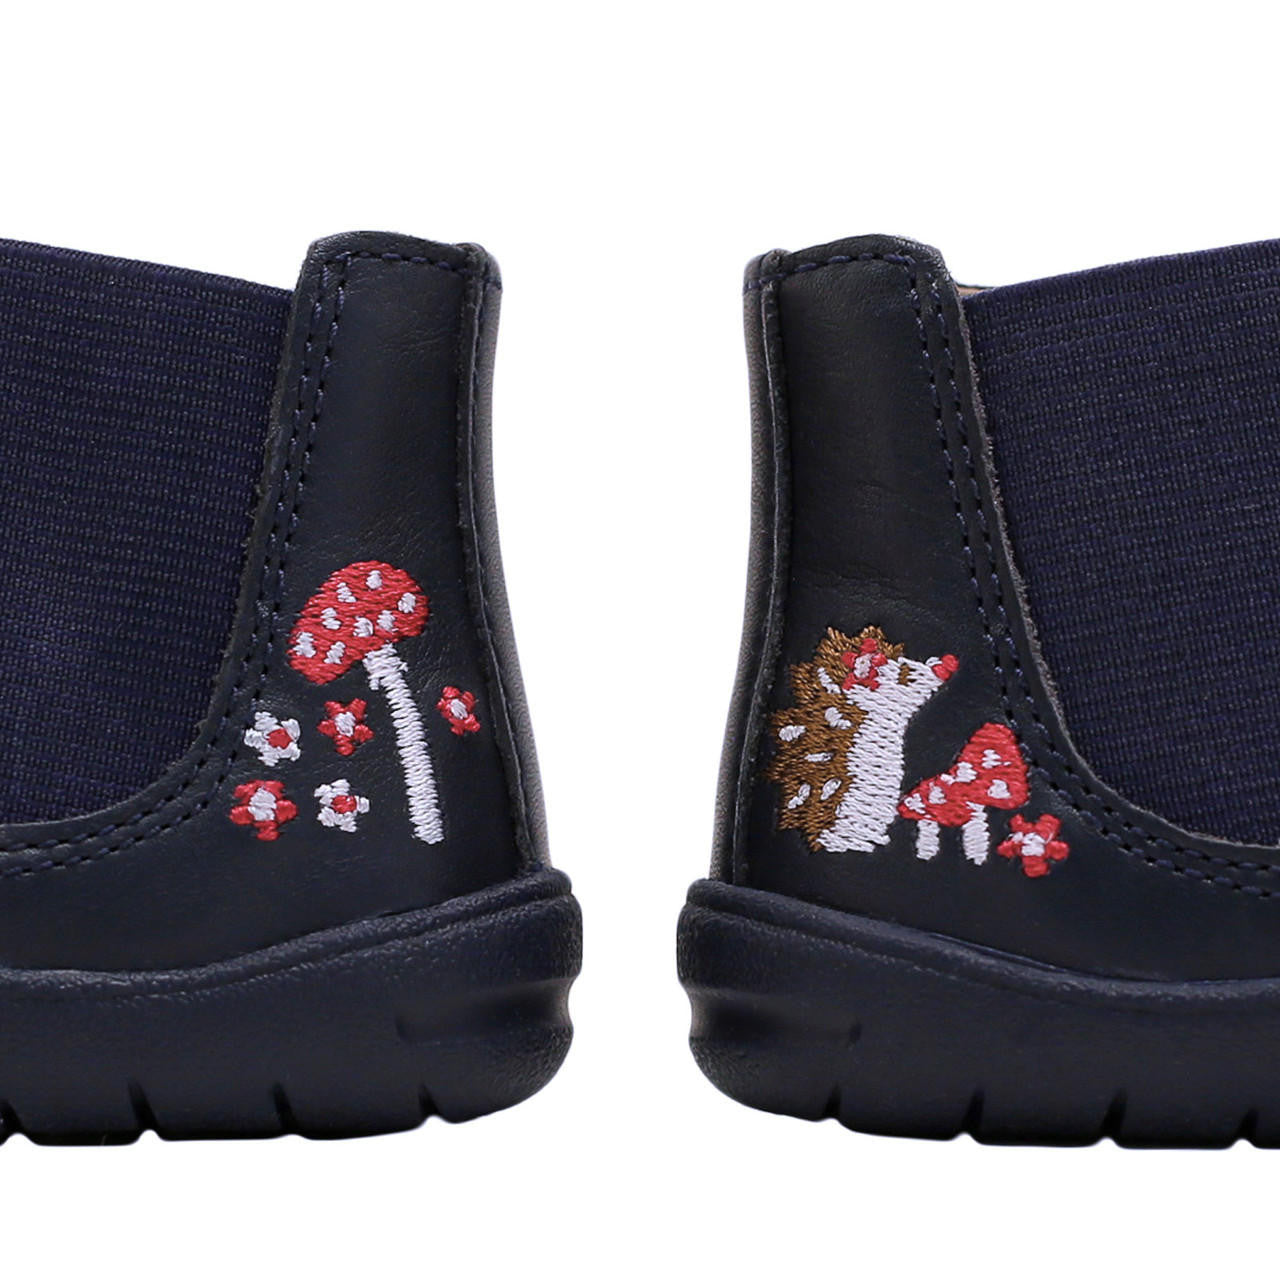 A Start-Rite + JoJo Maman Bebé girls chelsea boot in navy leather. Style is Friend with side zip fastening , heel detail shown here, toadstool on the left heel and hedgehog on the right heel.